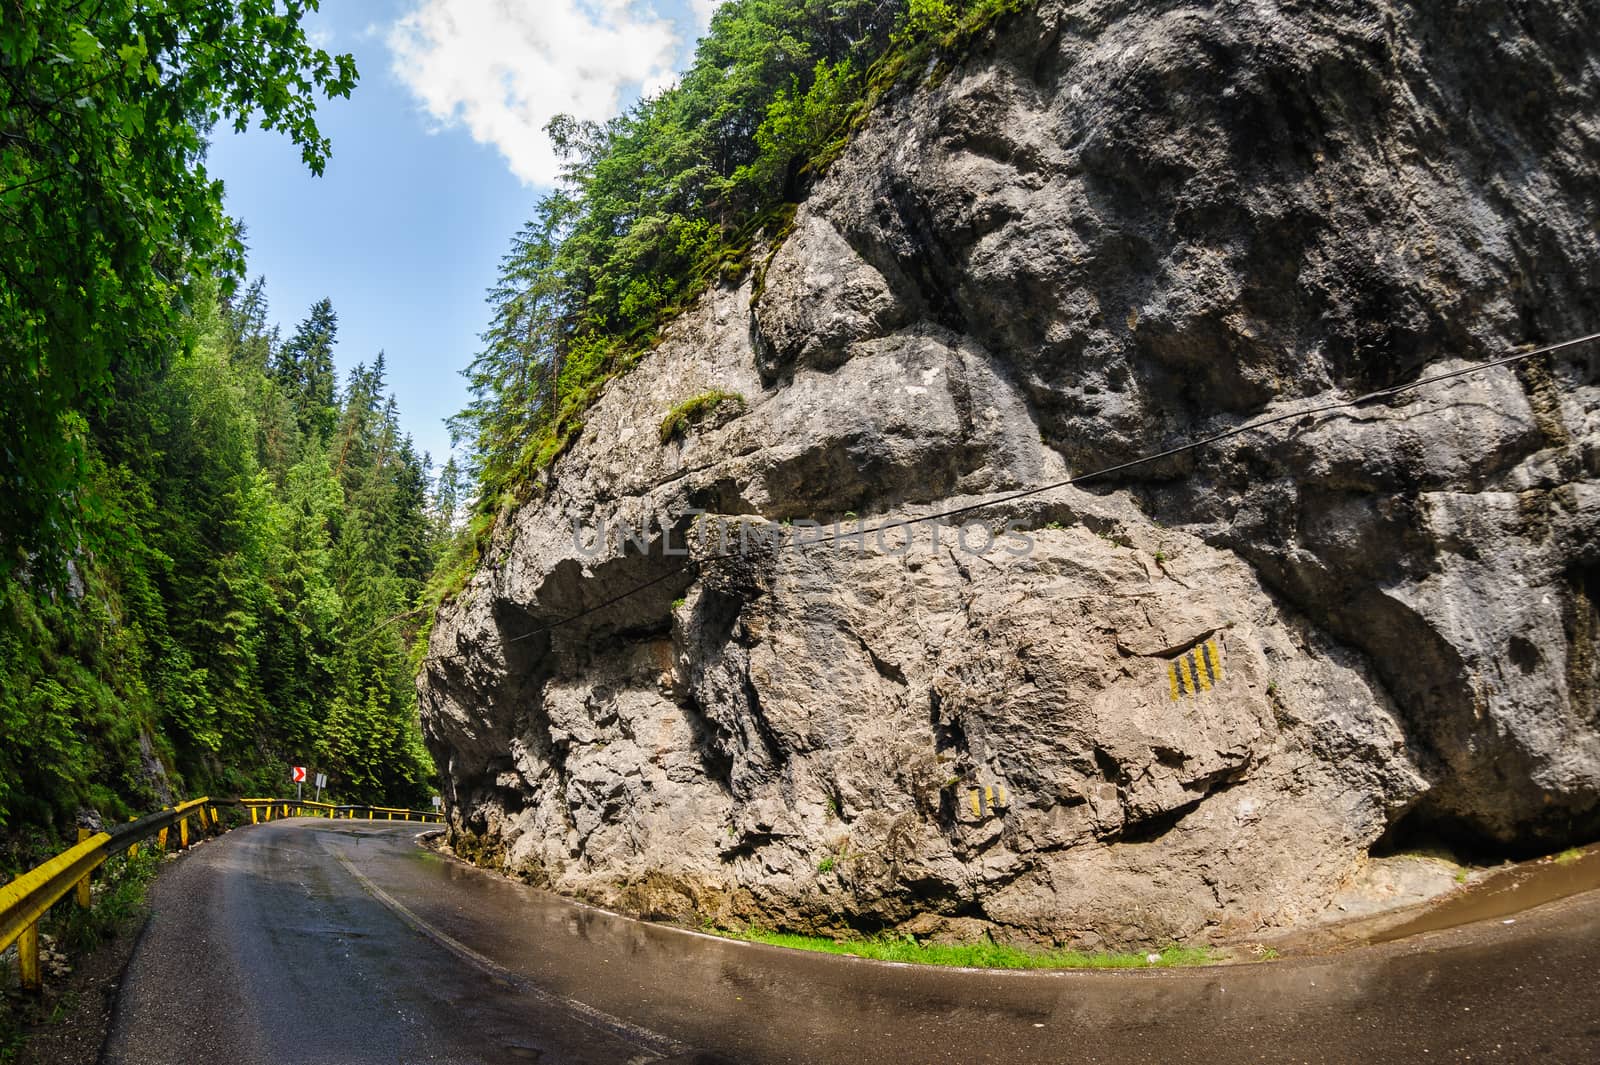 Curved wet road in Bicaz Canyon one of the most exciting travel road in Romania. Sunny after rain.